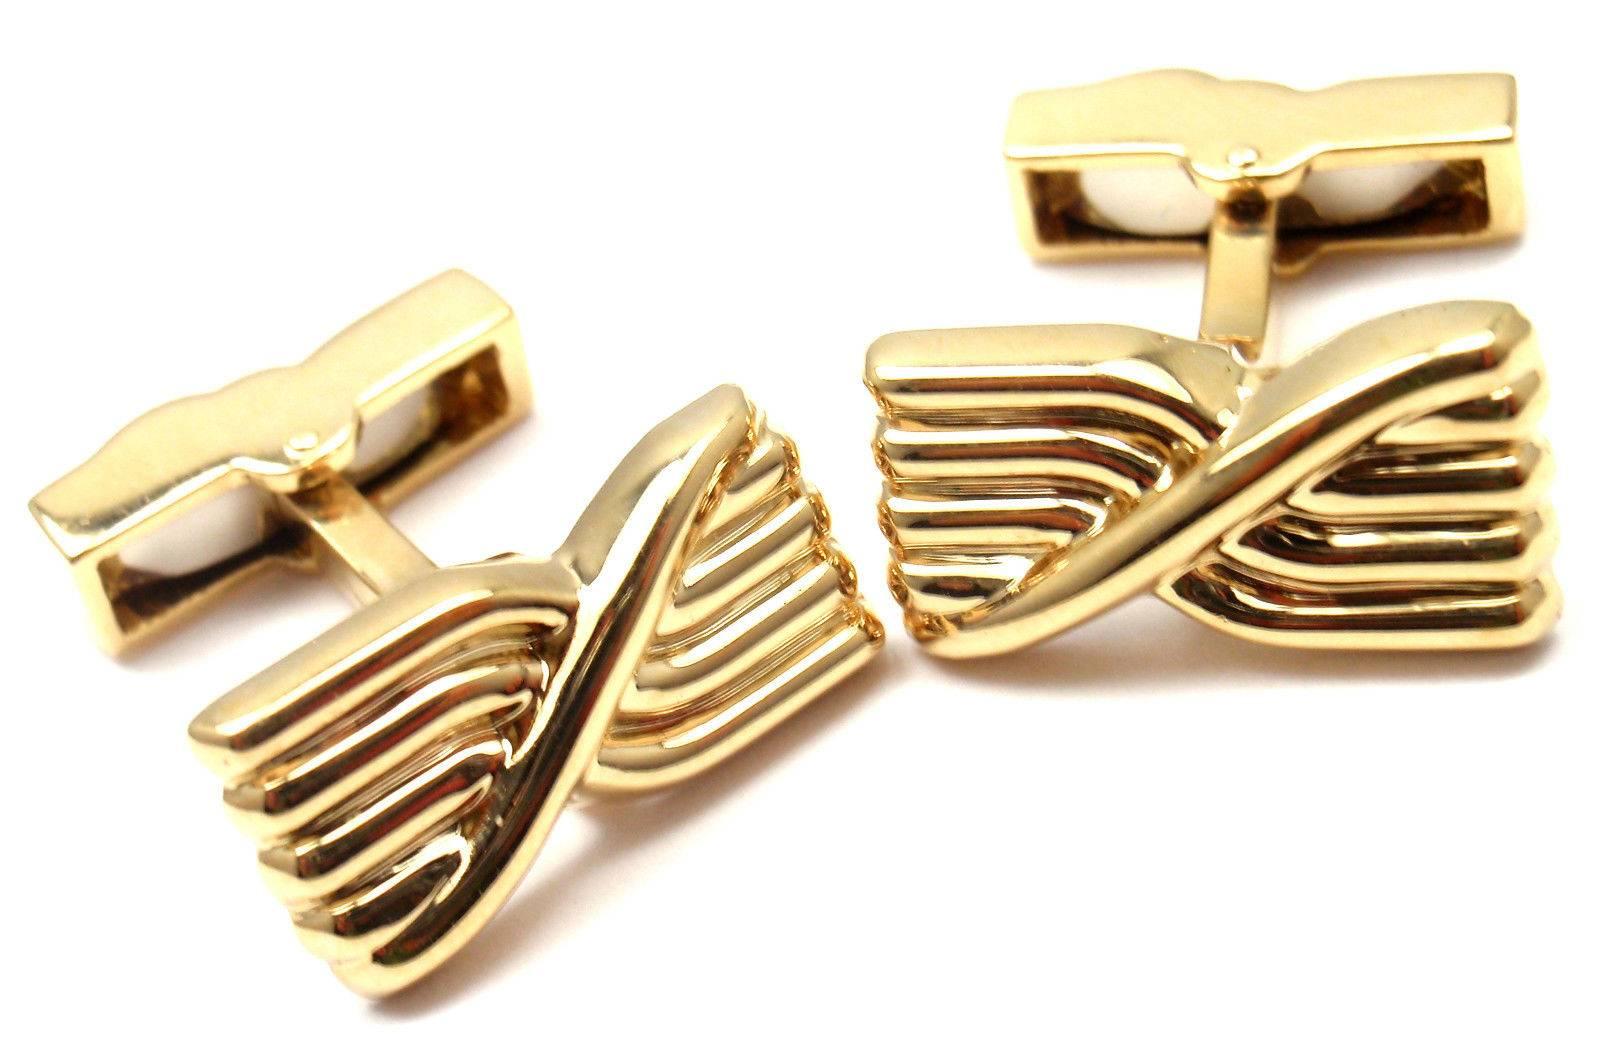 18k Yellow Gold Cufflinks by Tiffany & Co.  

Details: 
Measurements: 19mm x 10mm x 23mm
Weight: 18.3 grams 
Stamped Hallmarks: Tiffany & Co. 750

*Free Shipping within the United States*  
YOUR PRICE: $2,500
T898nmd